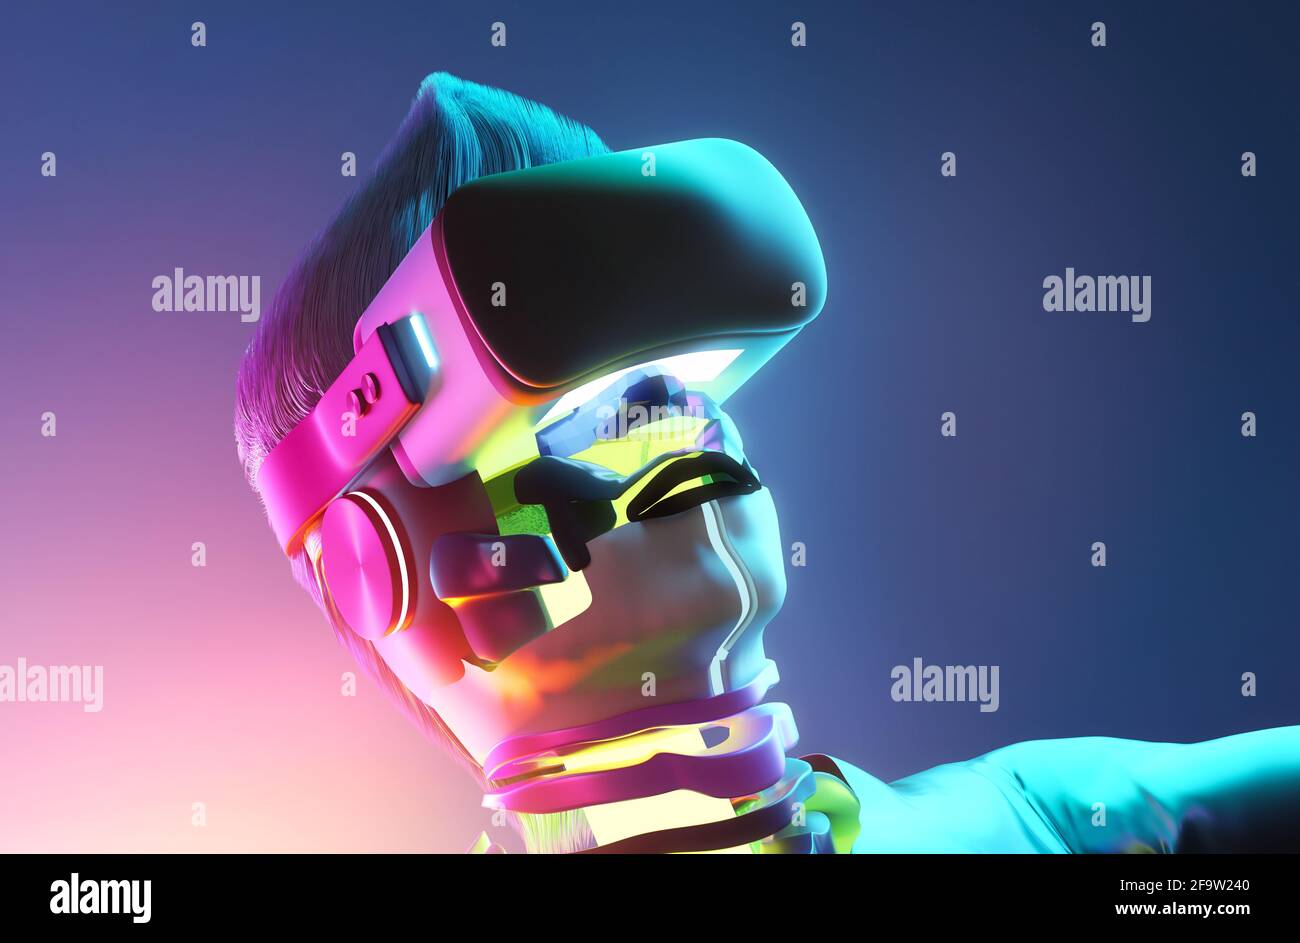 Futuristic surreal man wearing a virtual reality headset, VR lifestyle 3D illustration. Stock Photo